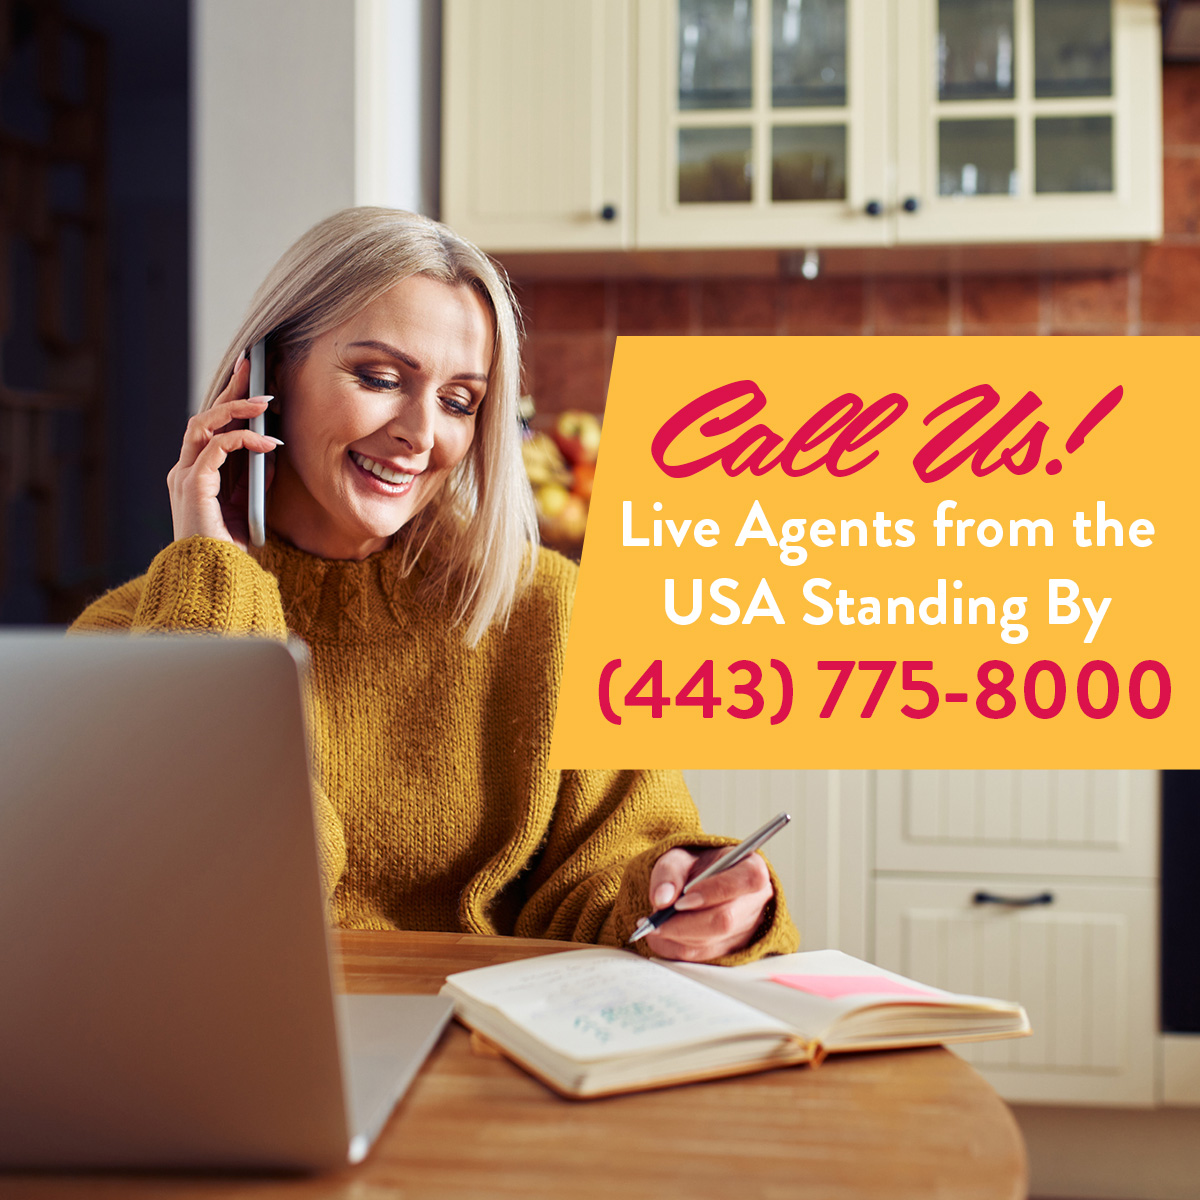 Call Us! Live Agents from the USA Standing By